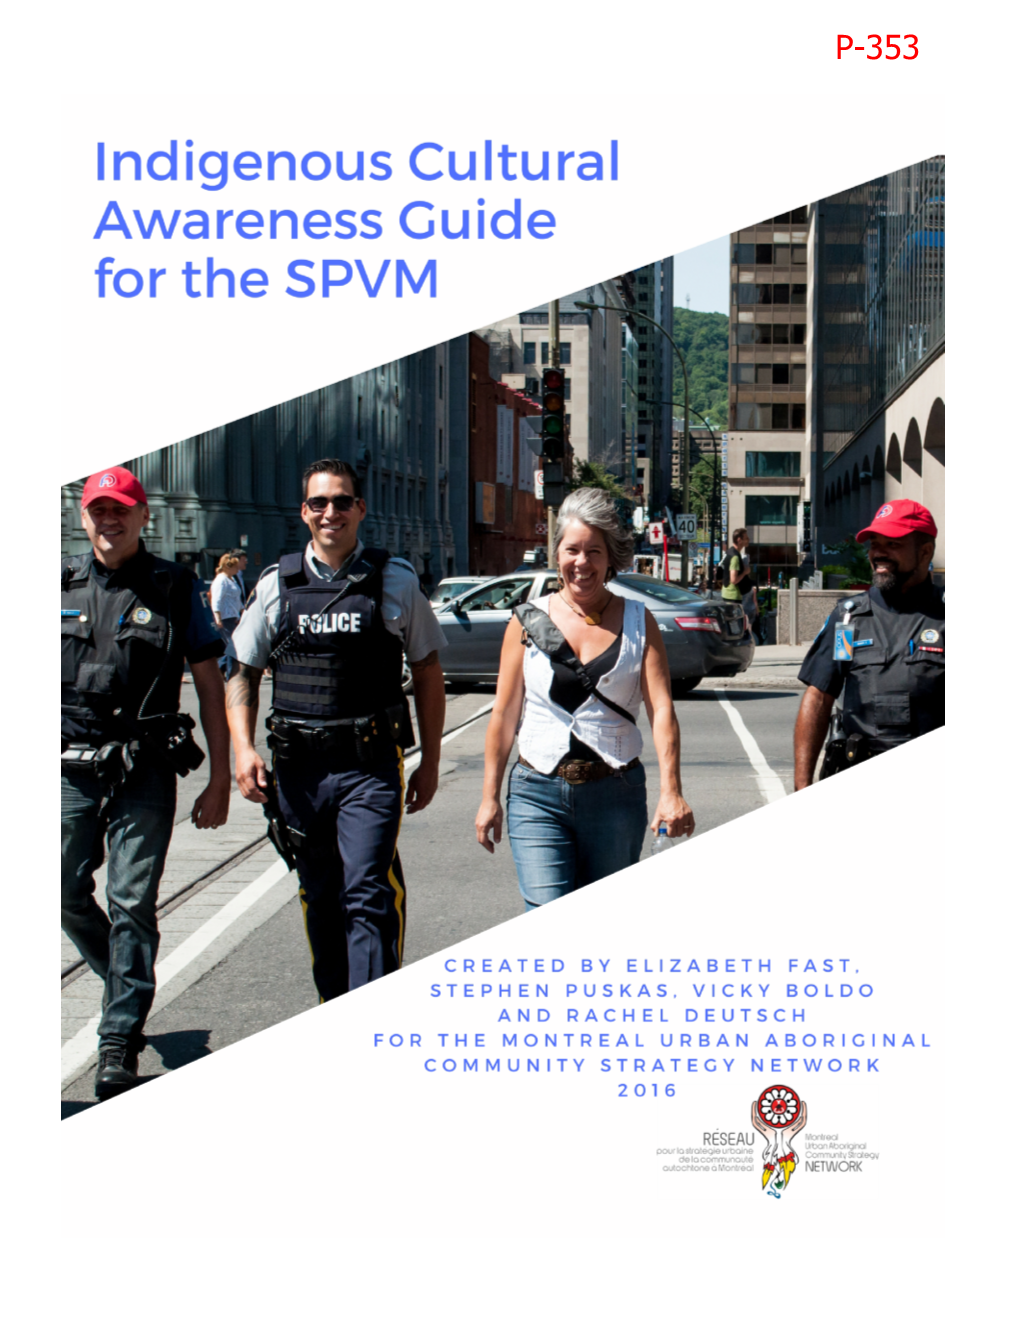 P-353: Indigenous Cultural Awareness Guide for the SPVM